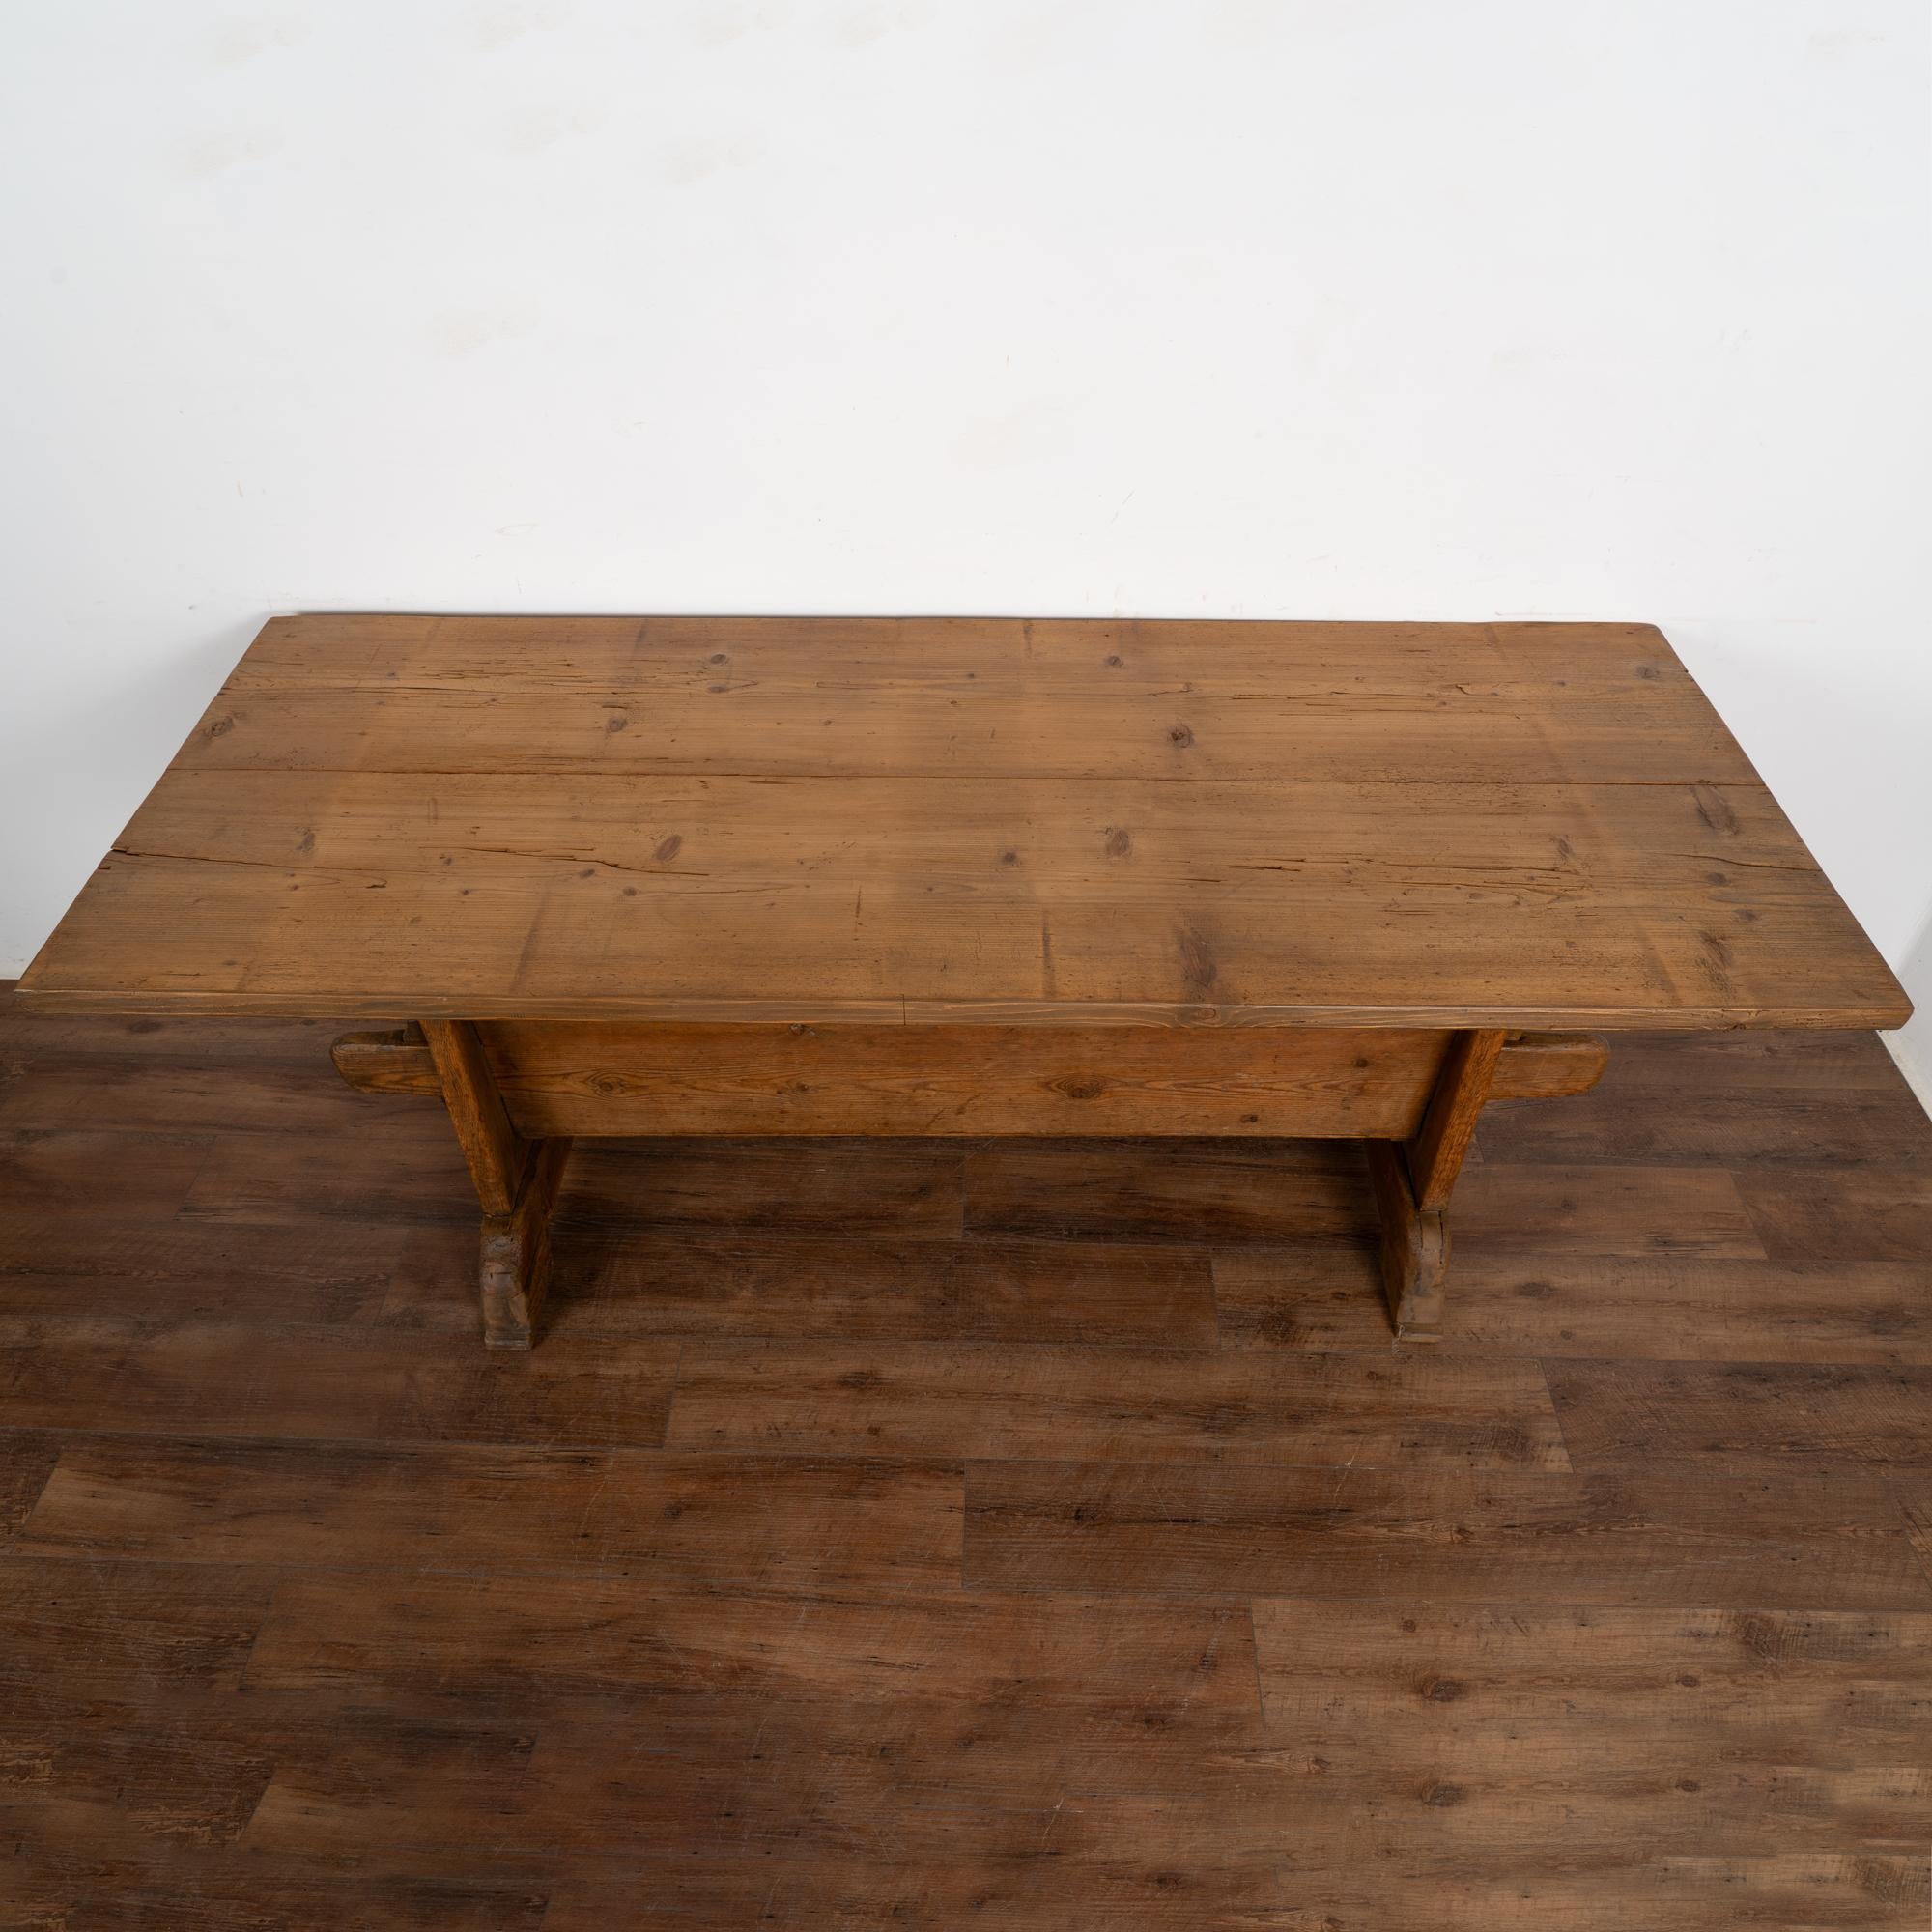 Swedish Antique Pine Farm Kitchen Dining Table, Sweden circa 1800-20 For Sale